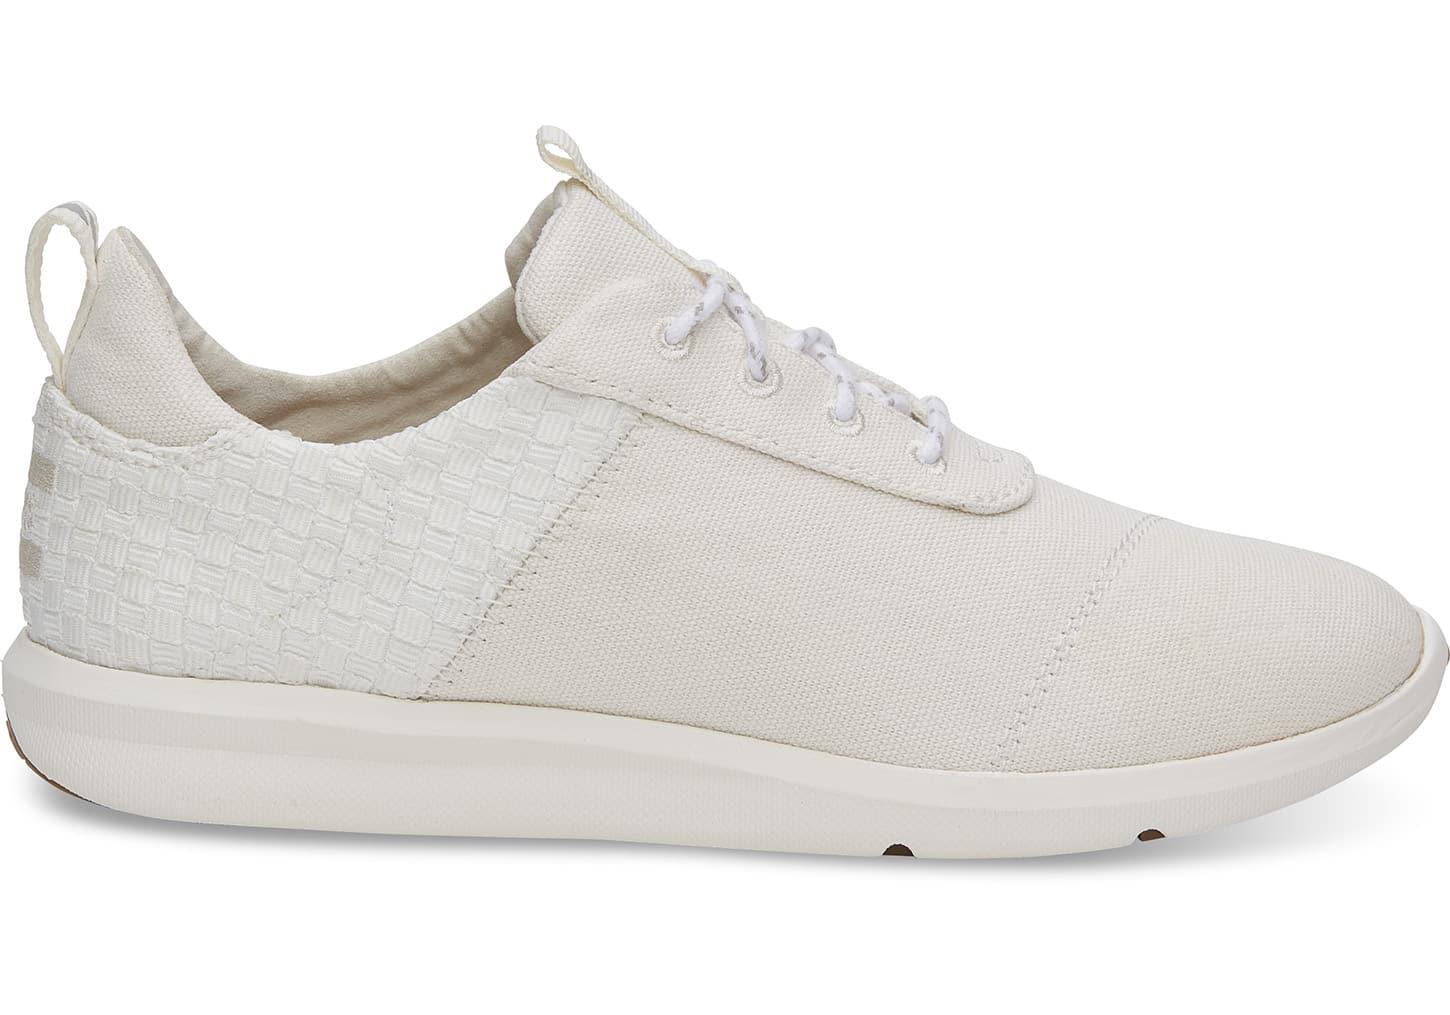 TOMS White Heritage Canvas Women's Cabrillo Sneakers - Lyst